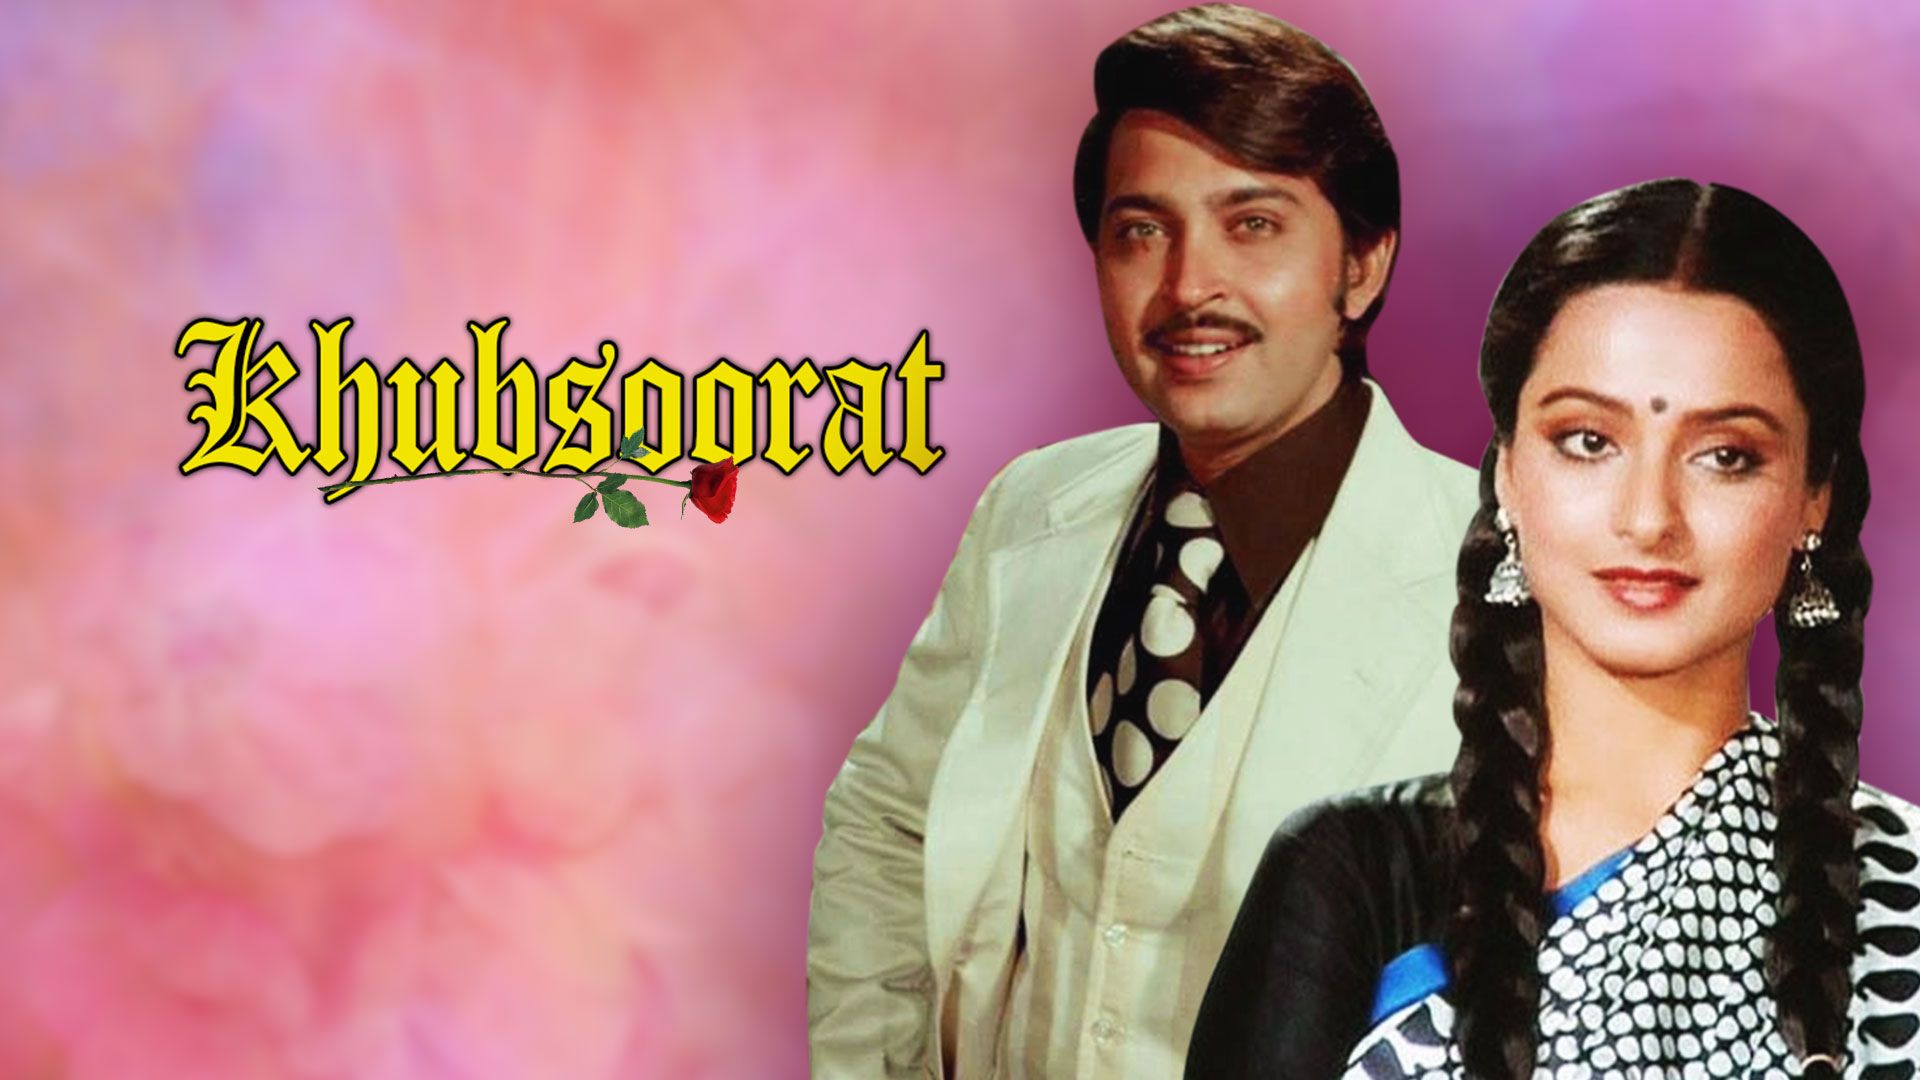 beth snelgrove recommends khubsoorat full movie hd pic